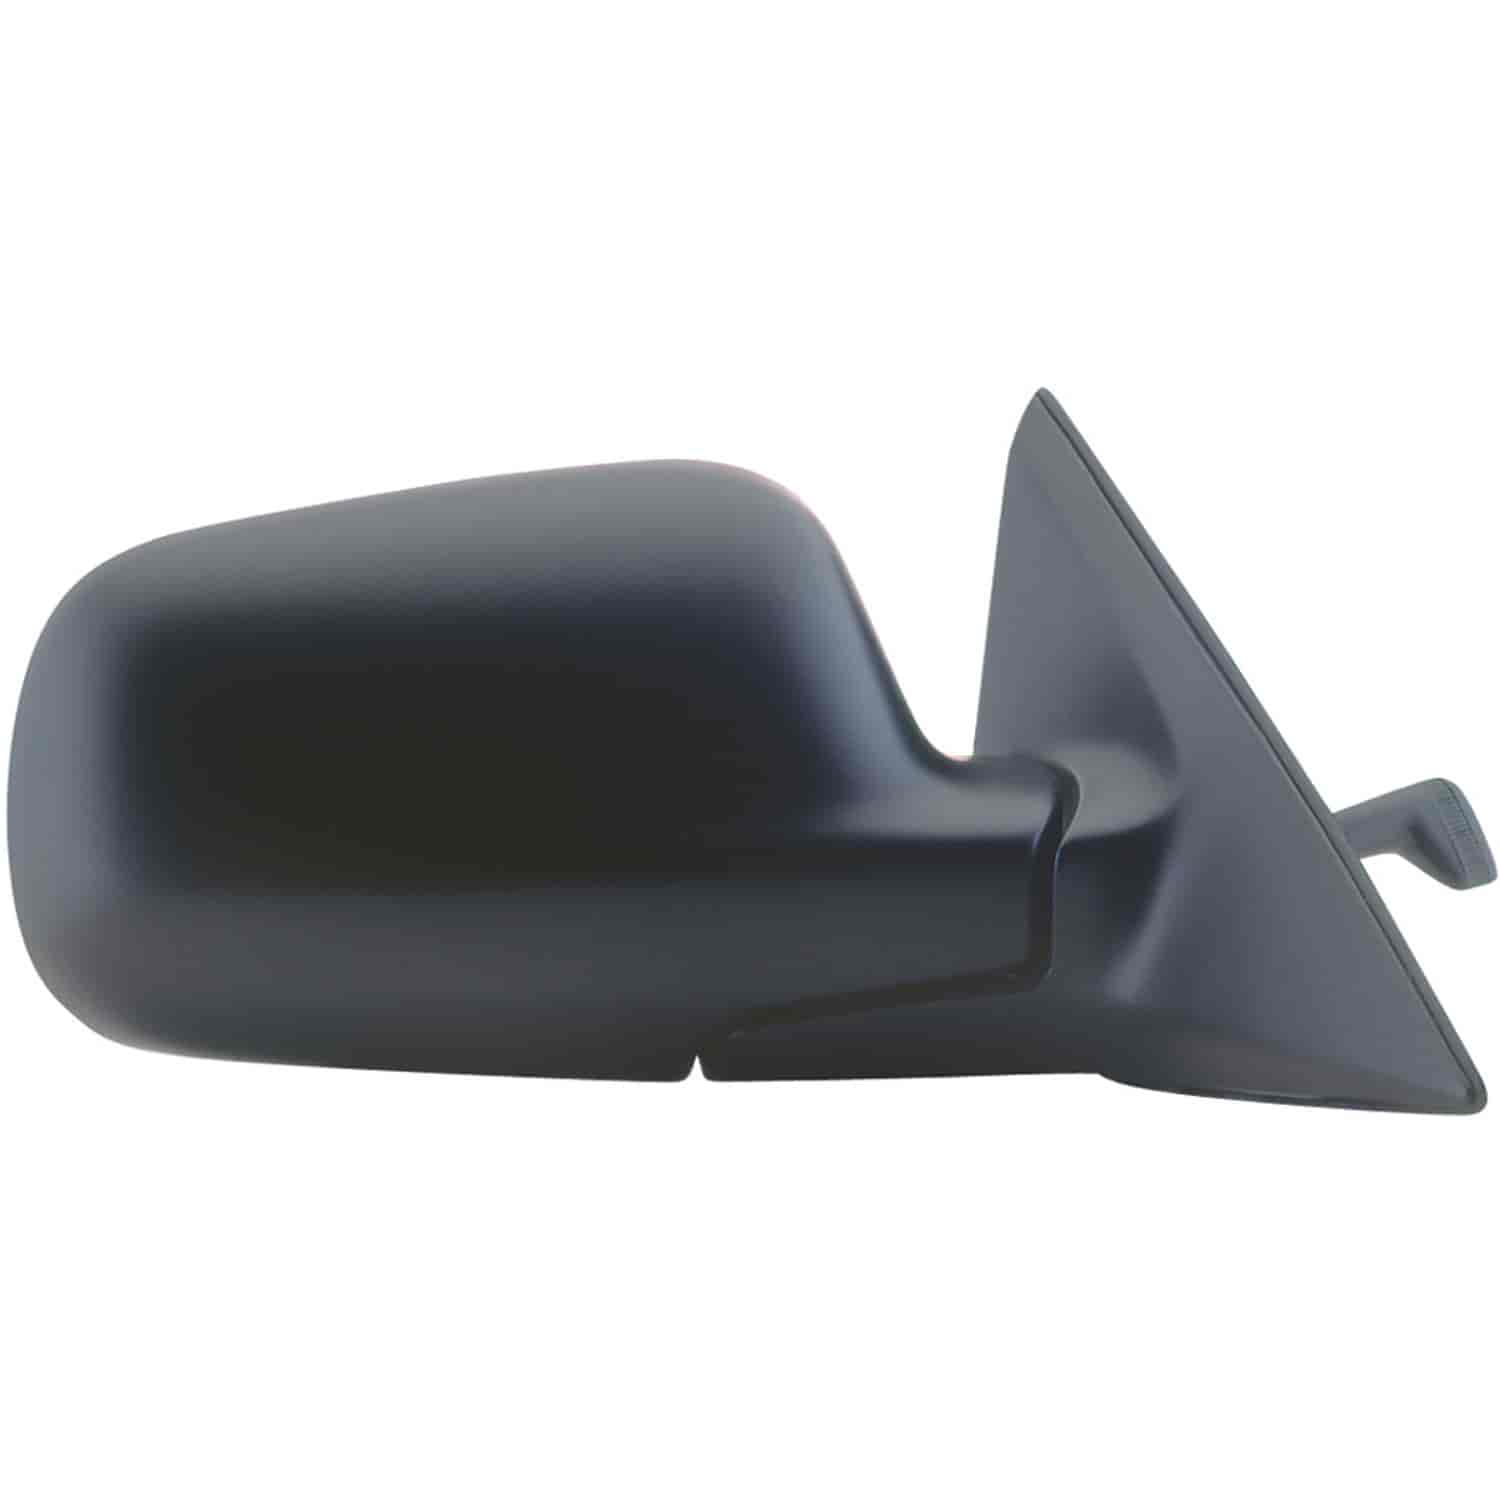 OEM Style Replacement mirror for 94-97 Honda Accord Coupe passenger side mirror tested to fit and fu